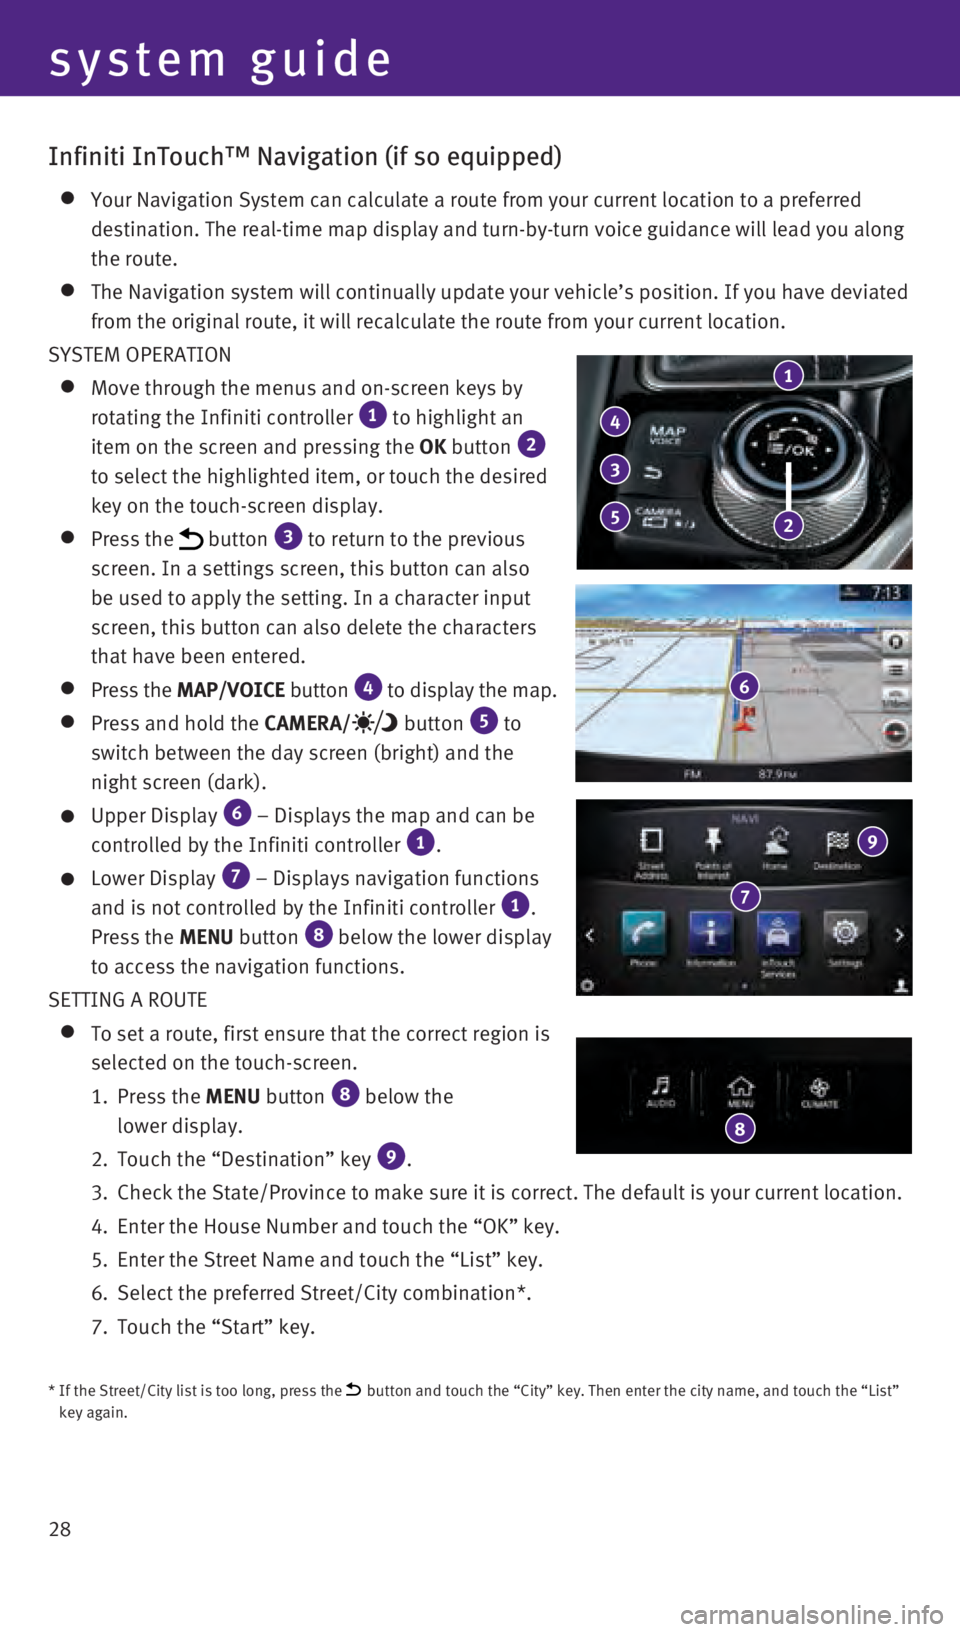 INFINITI Q50 2016  Quick Reference Guide 28
Infiniti InTouch™ Navigation (if so equipped)
    Your Navigation System can calculate a route from your current location \
to a preferred 
destination. The real-time map display and turn-by-turn